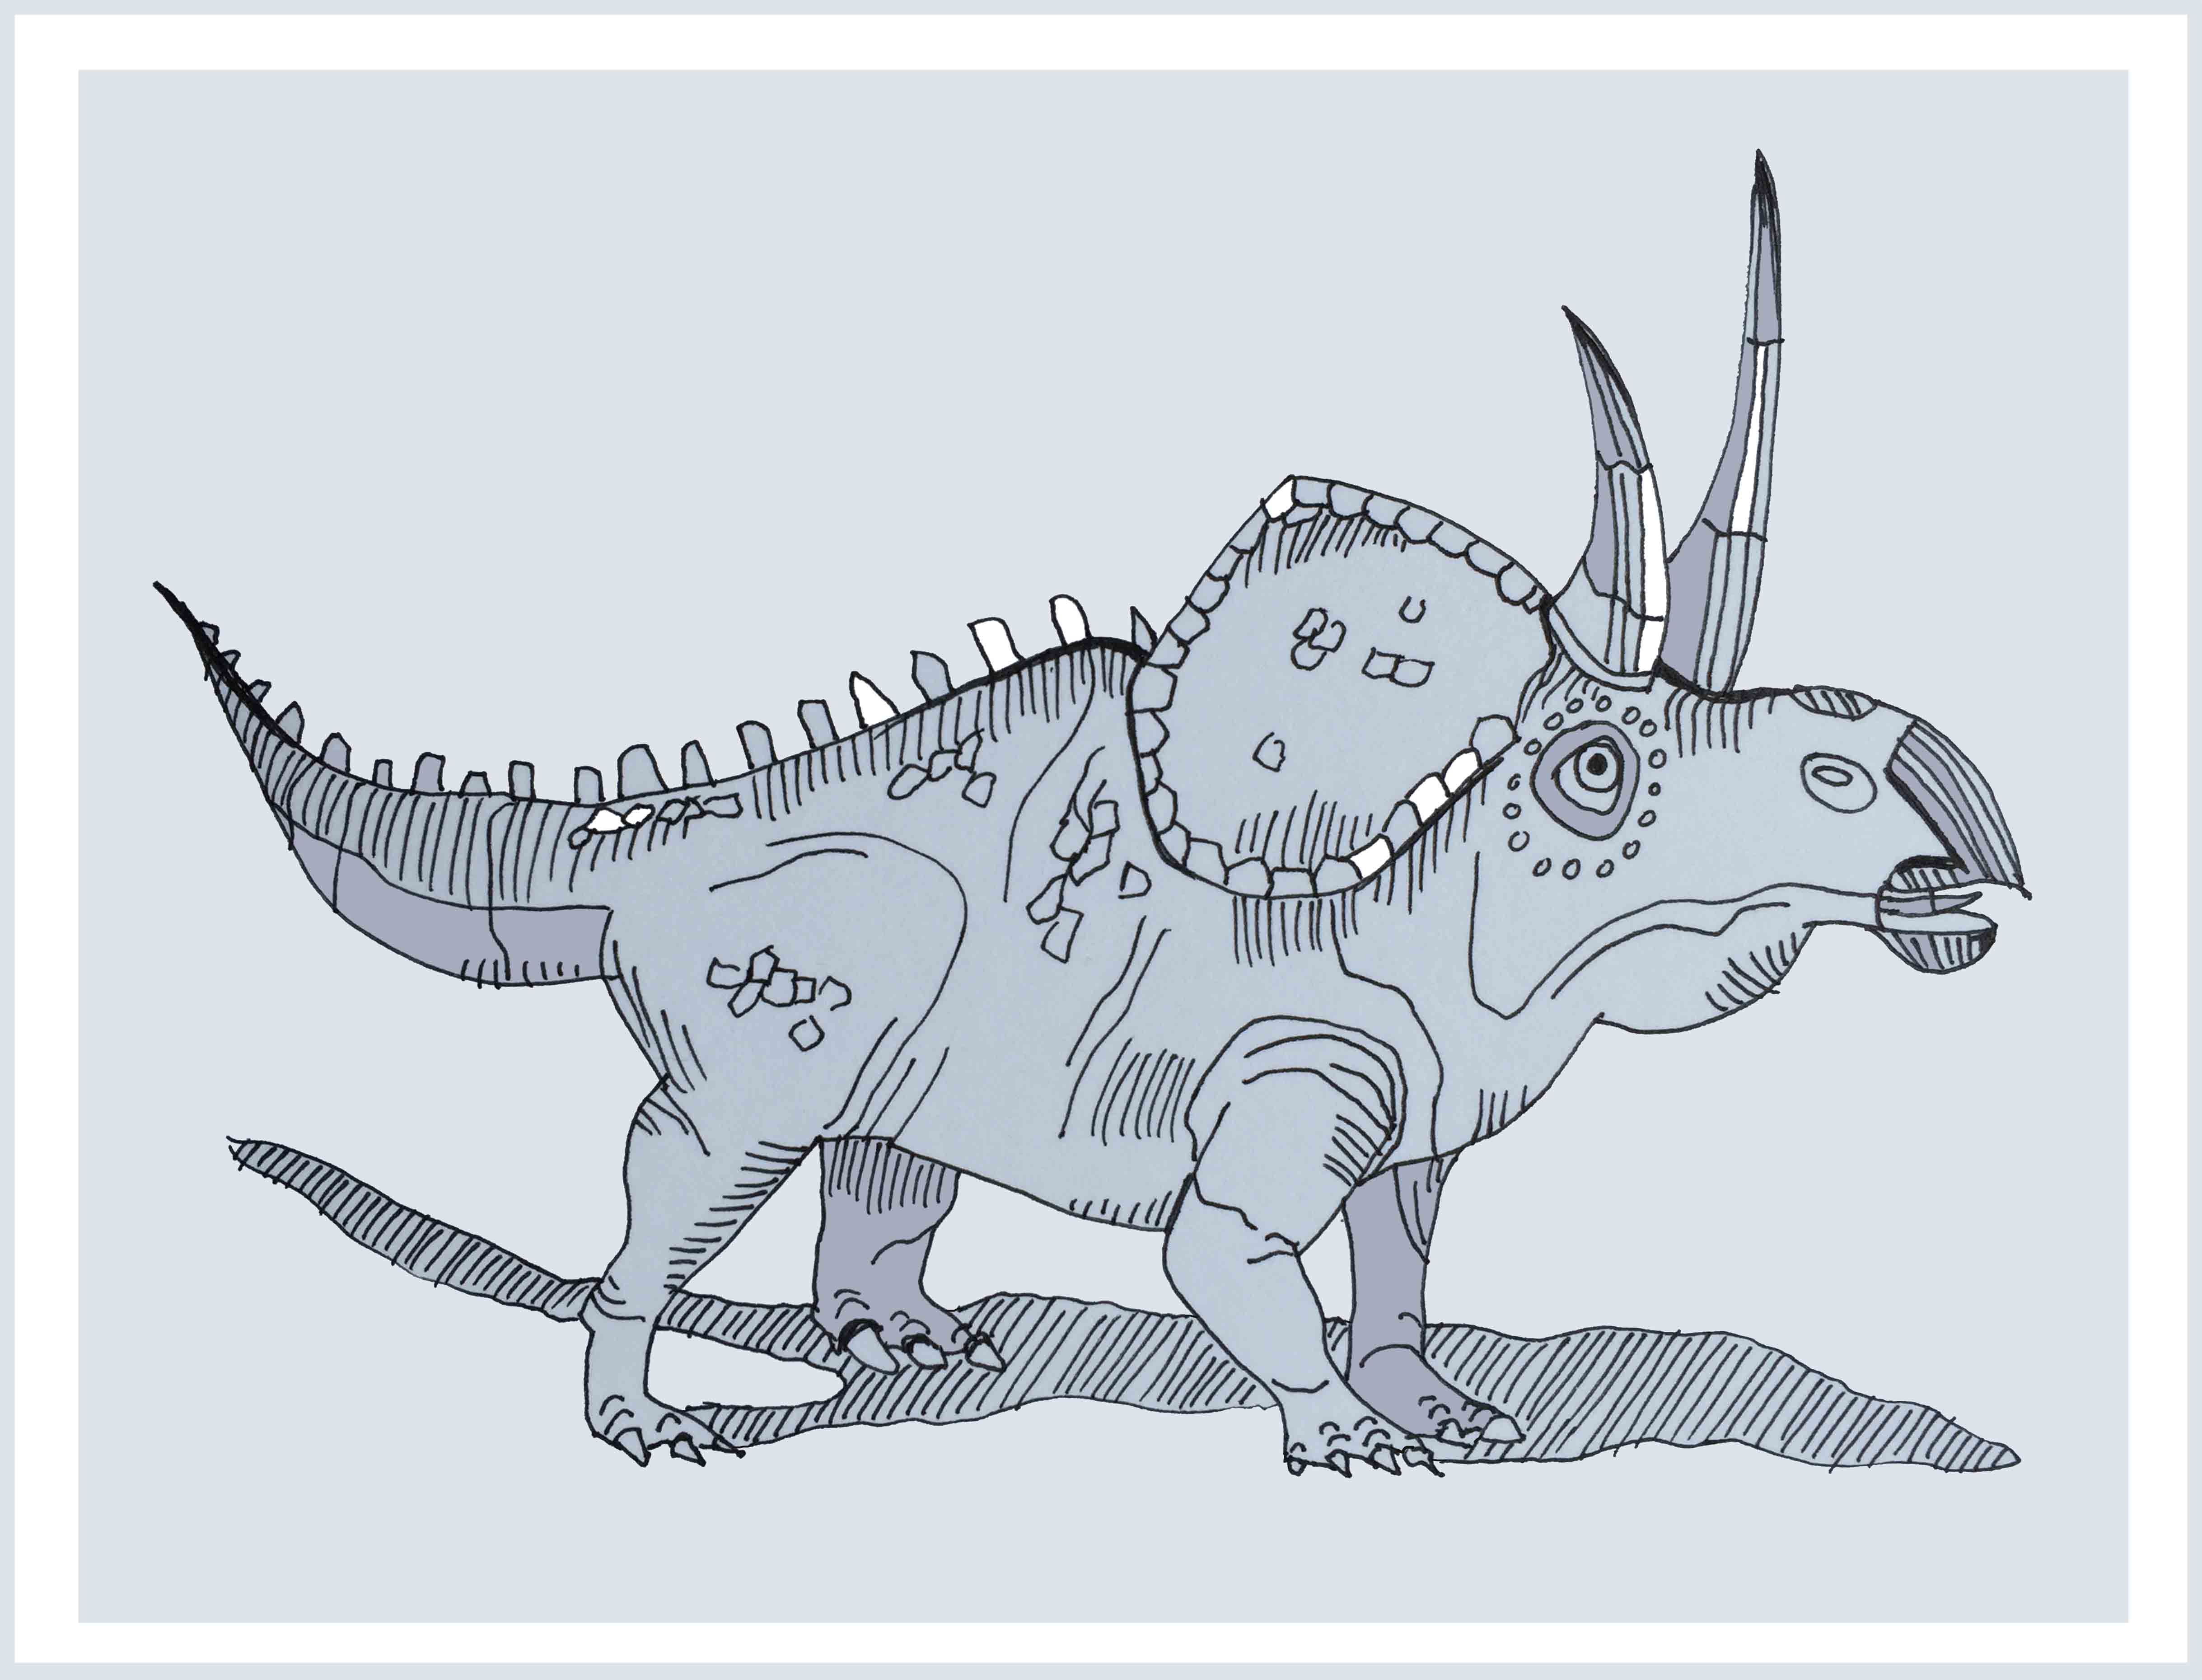 art every day number 139 / illustration / drawing / the zuniceratops